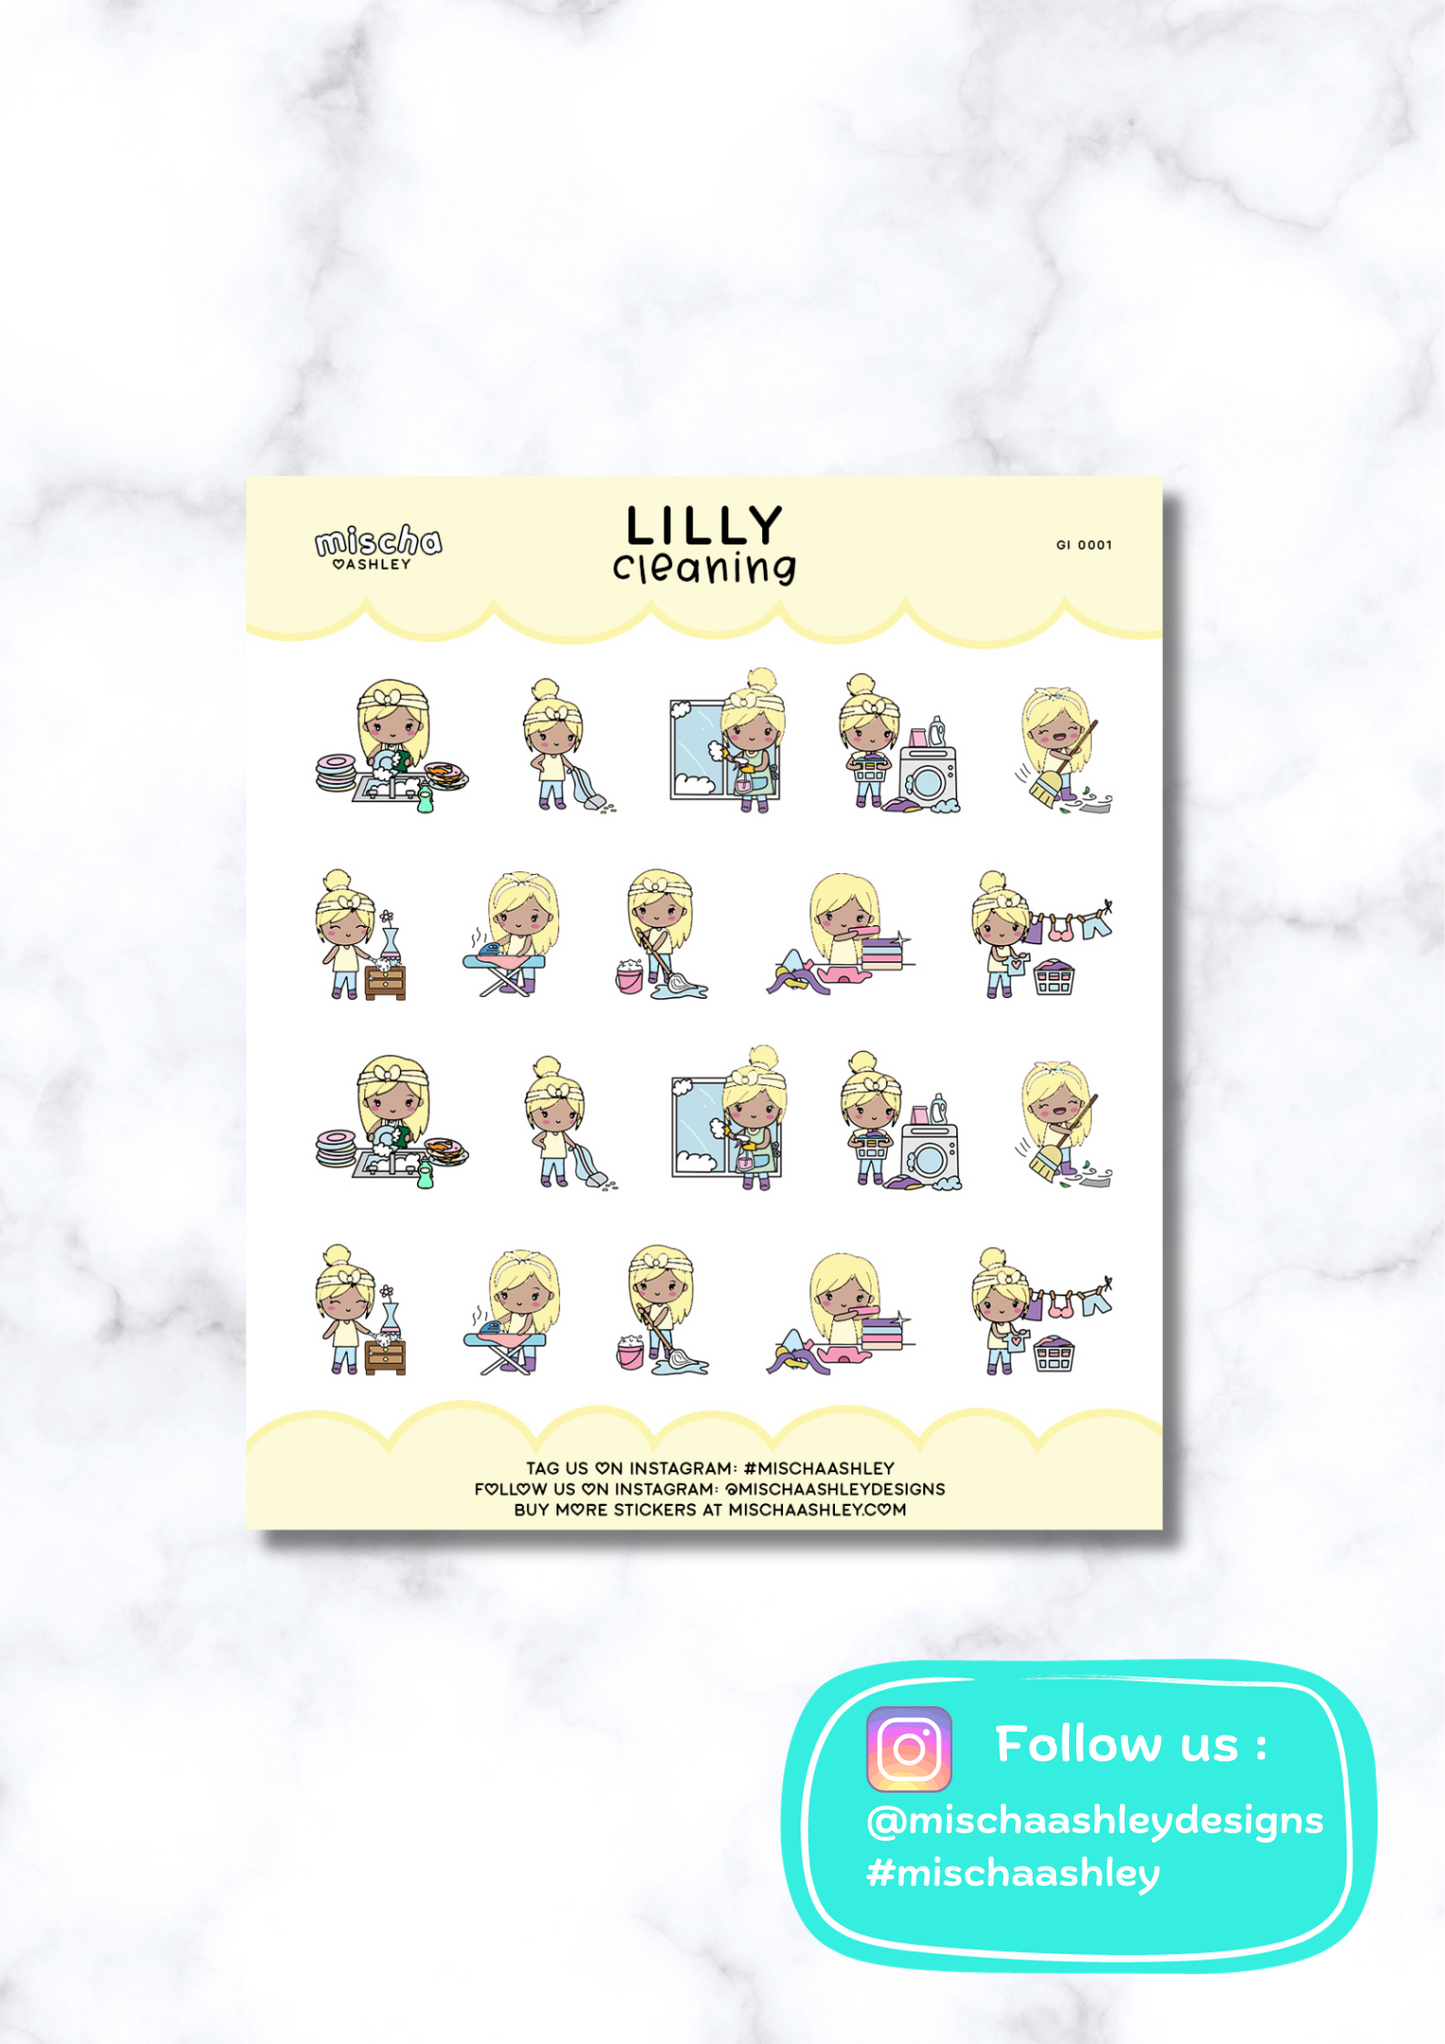 Lilly cleaning sampler